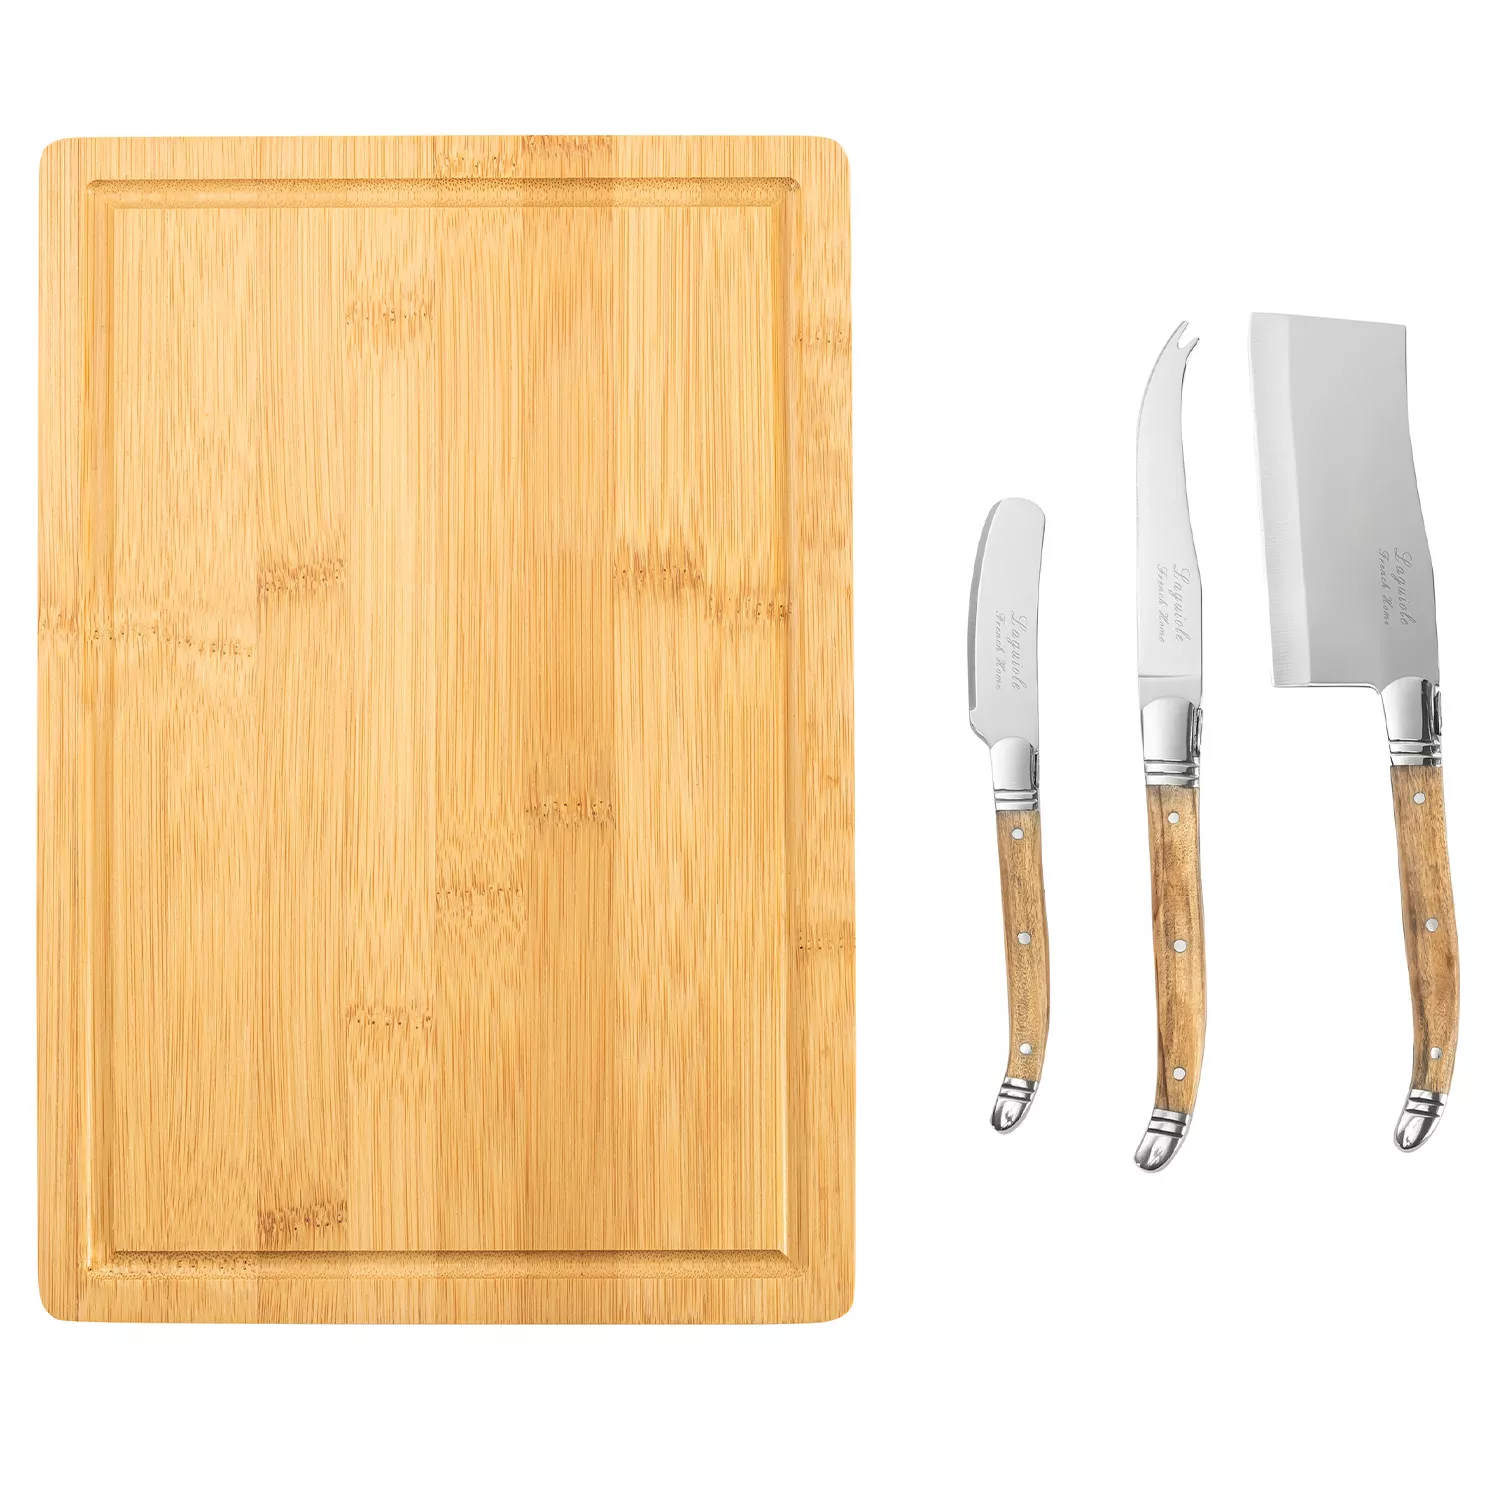 Laguiole cheese service with olive wood handle and stainless steel